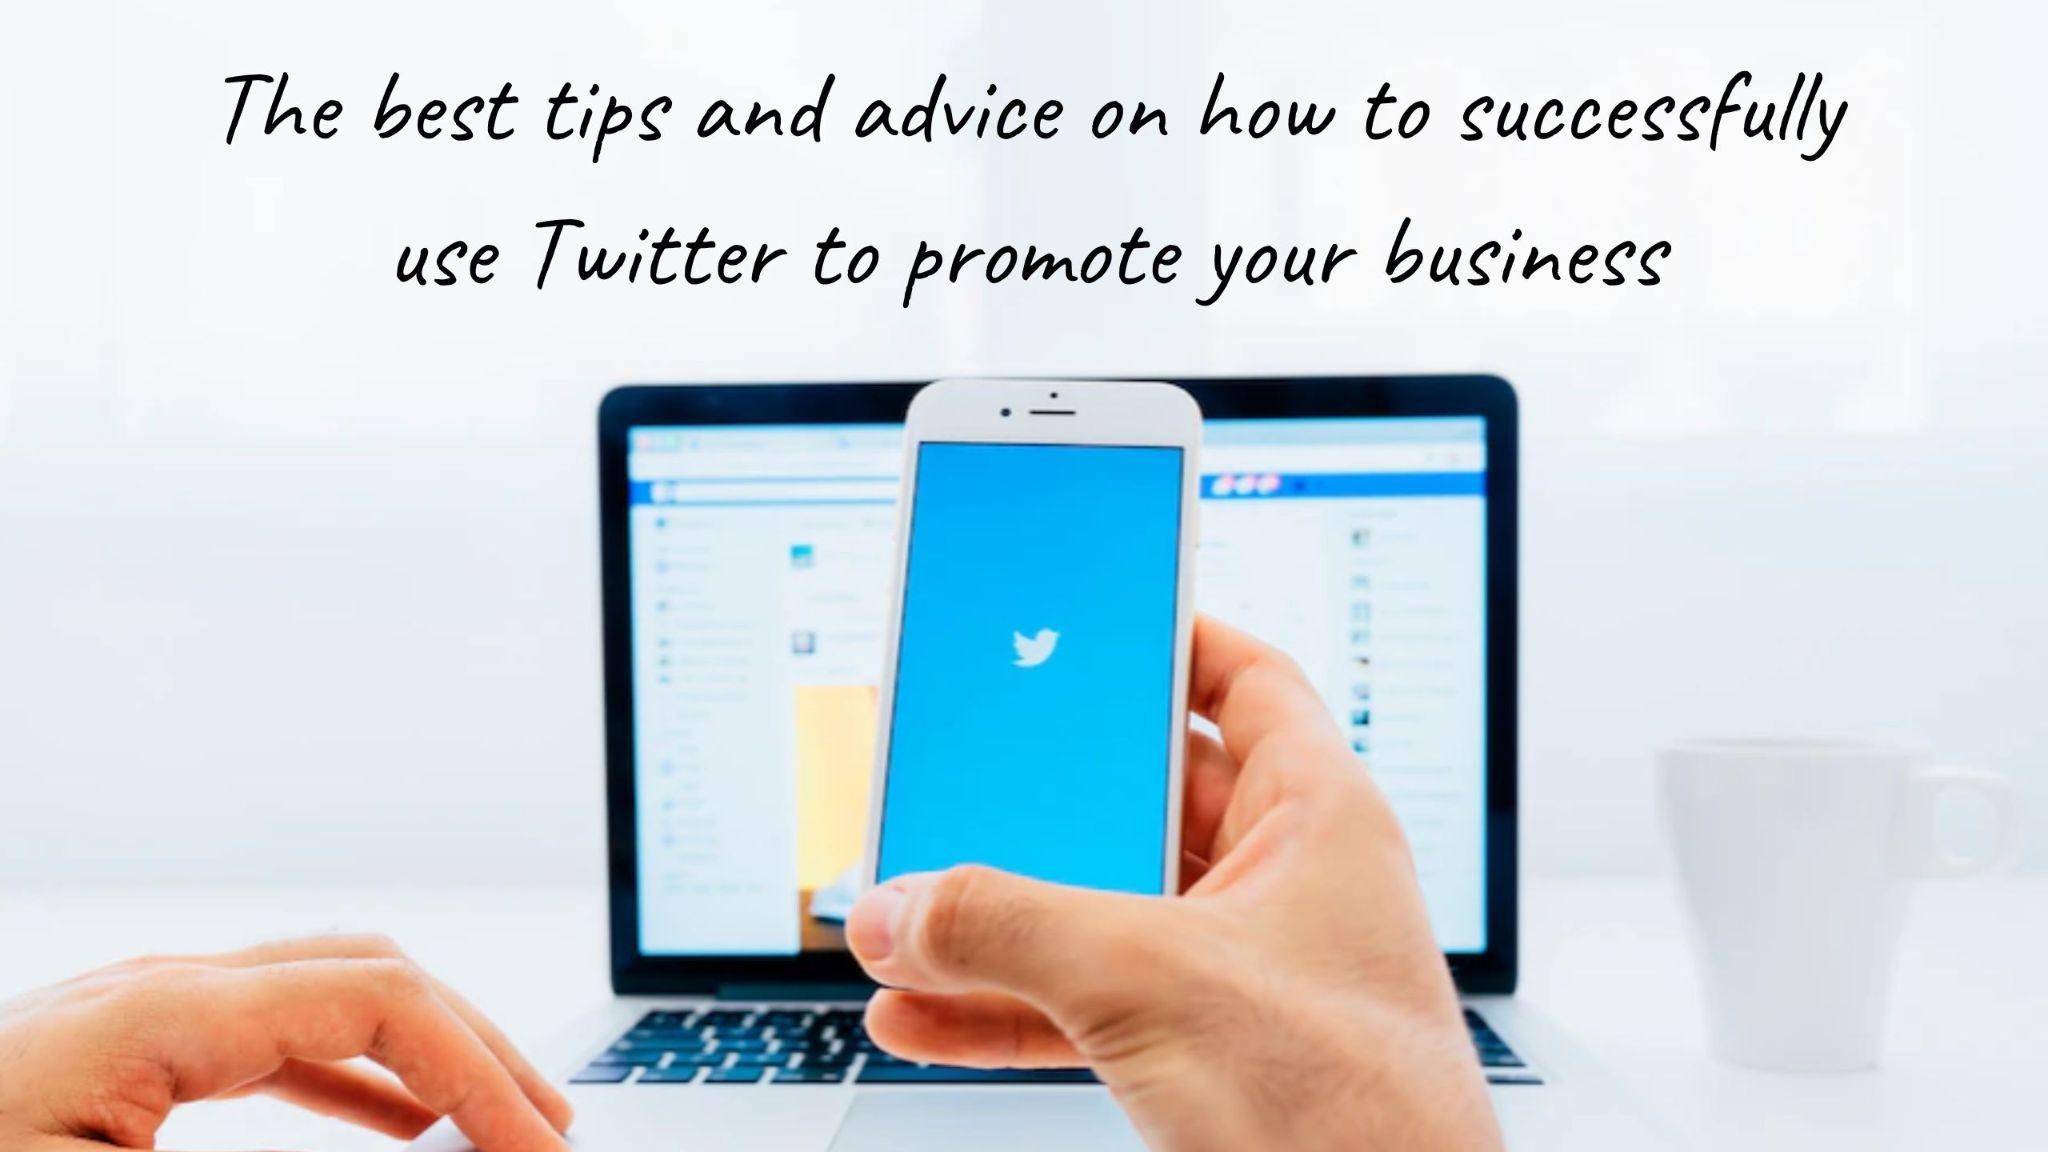 The best tips and advice on how to successfully use Twitter to promote your business